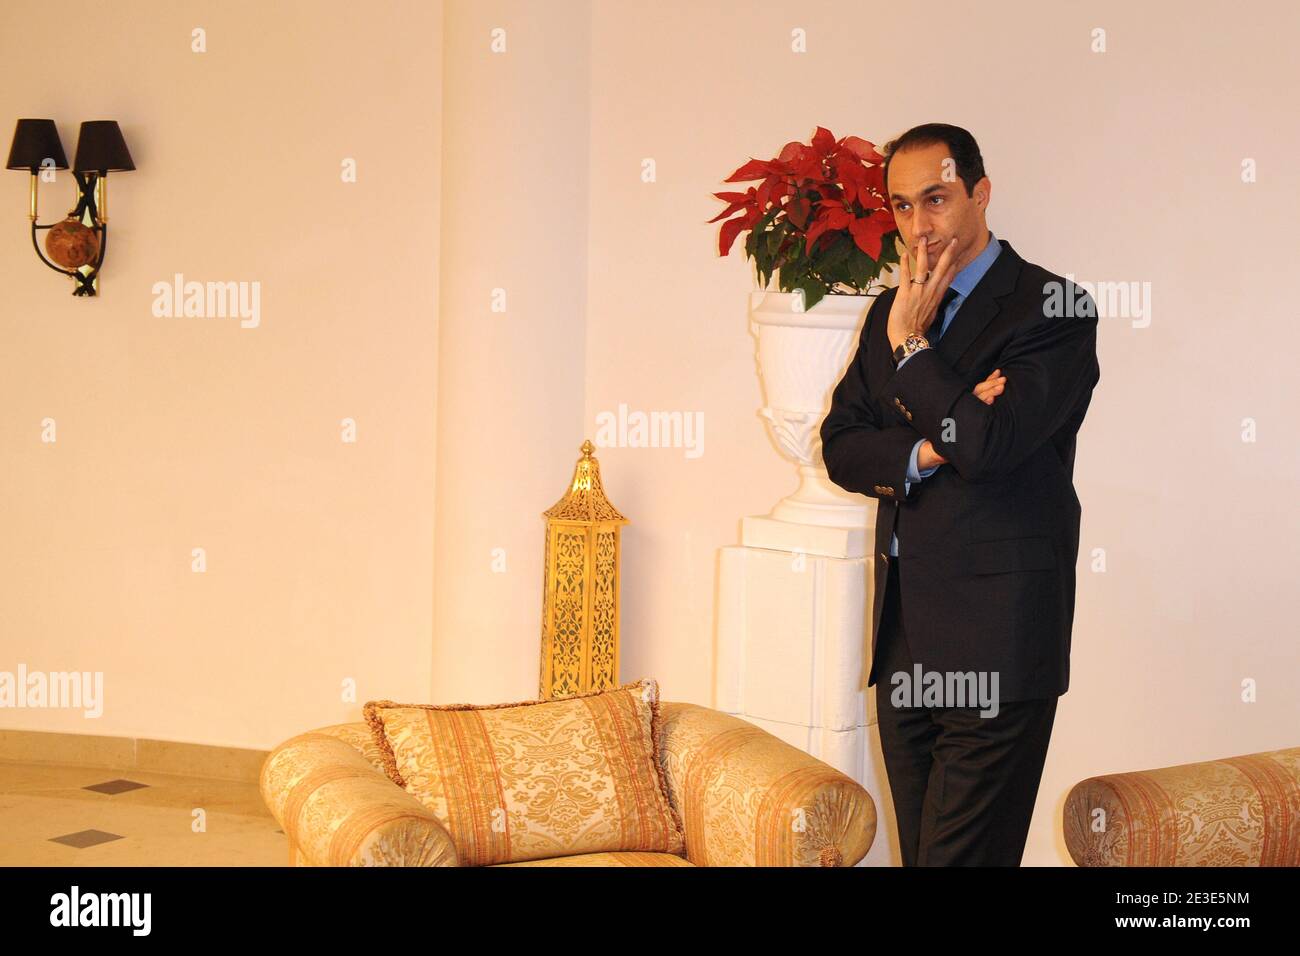 Egyptian President's son Gamal Mubarak, seen waiting in a lounge, prior to an international summit on Gaza crisis, in the Egyptian Red Sea resort of Sharm El Sheikh, Egypt on January 18, 2009. Photo by Ammar Abd Rabbo/ABACAPRESS.COM Stock Photo